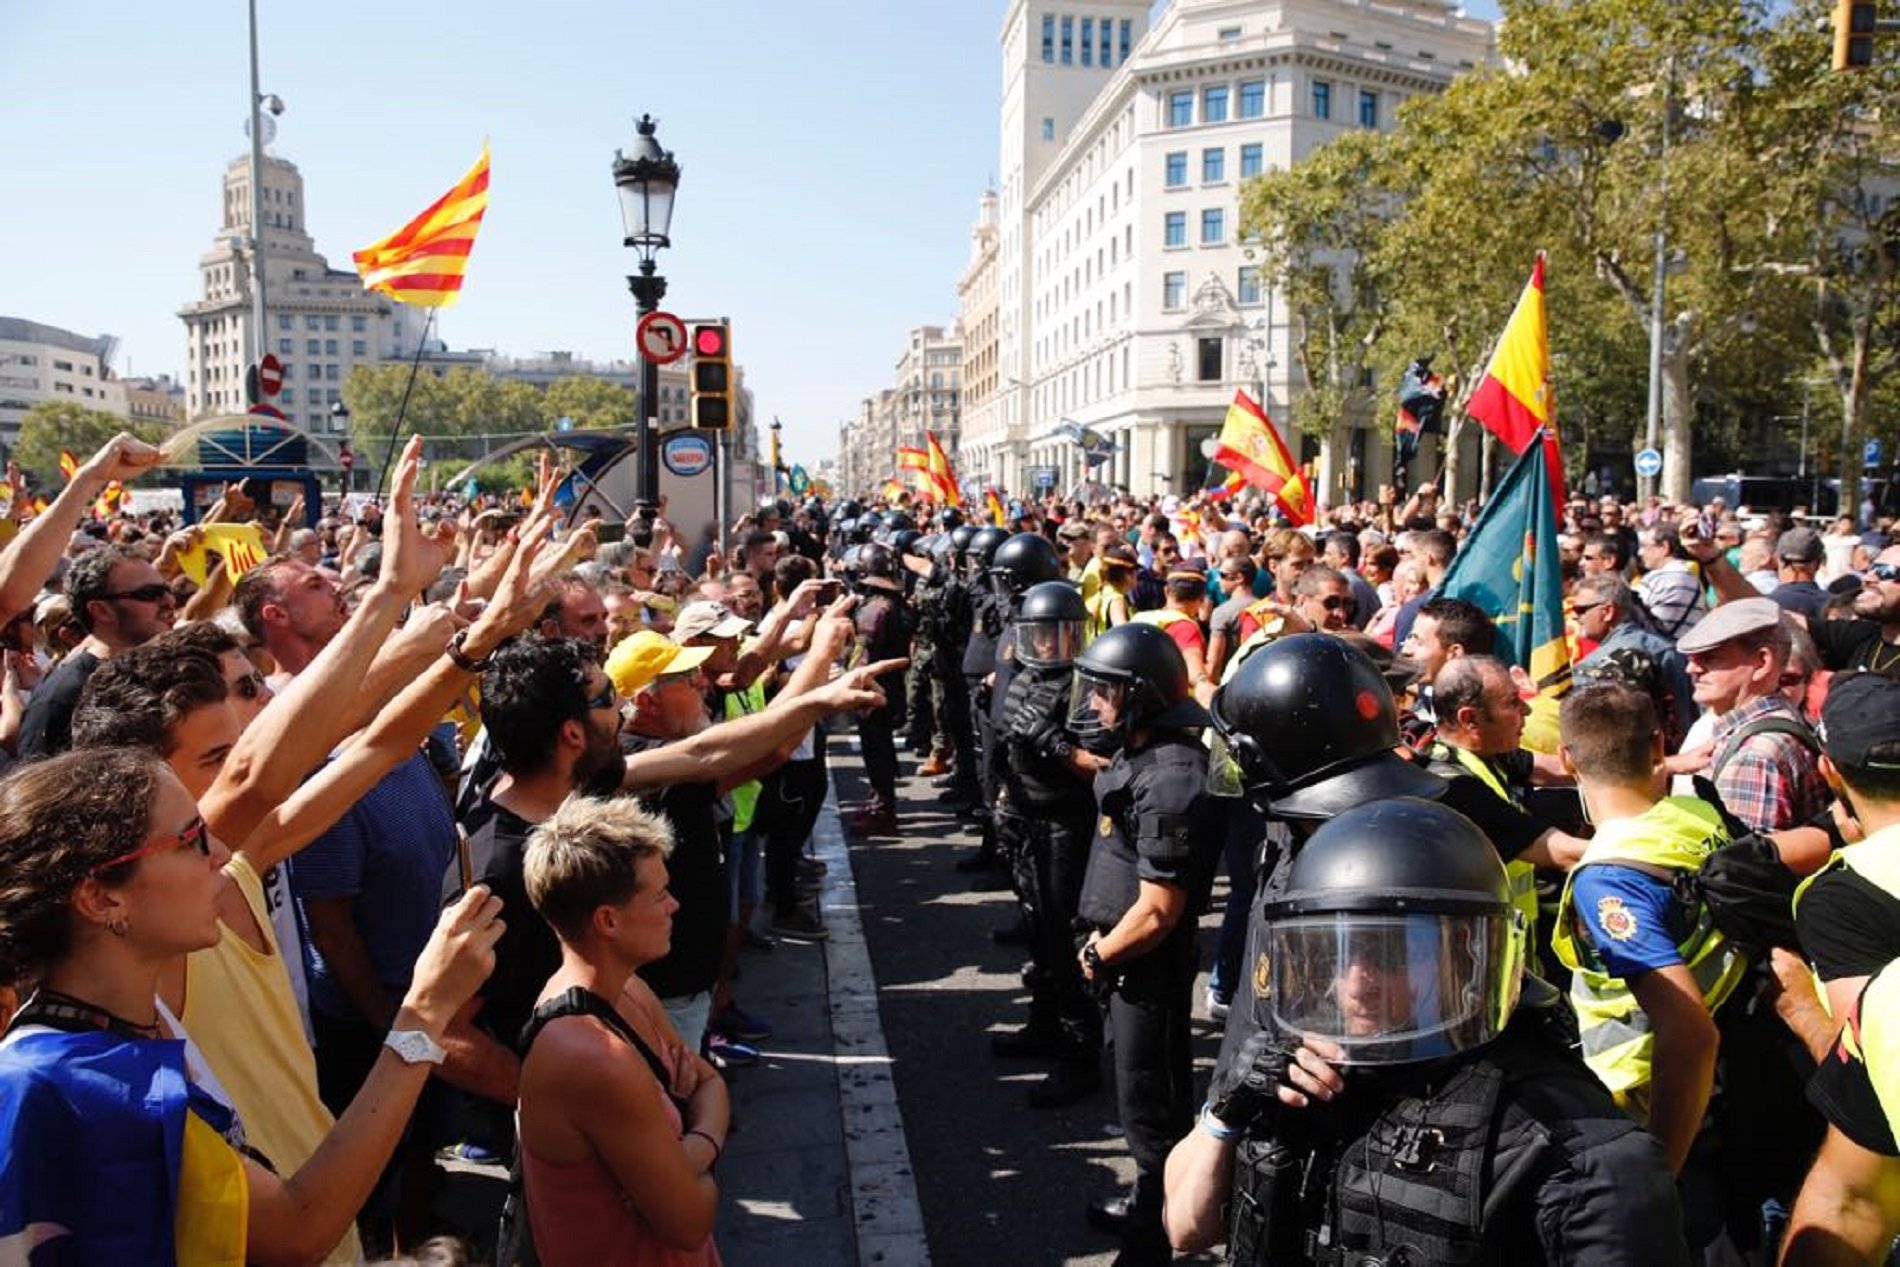 Independence movement holds its ground to unionist provocation in Barcelona